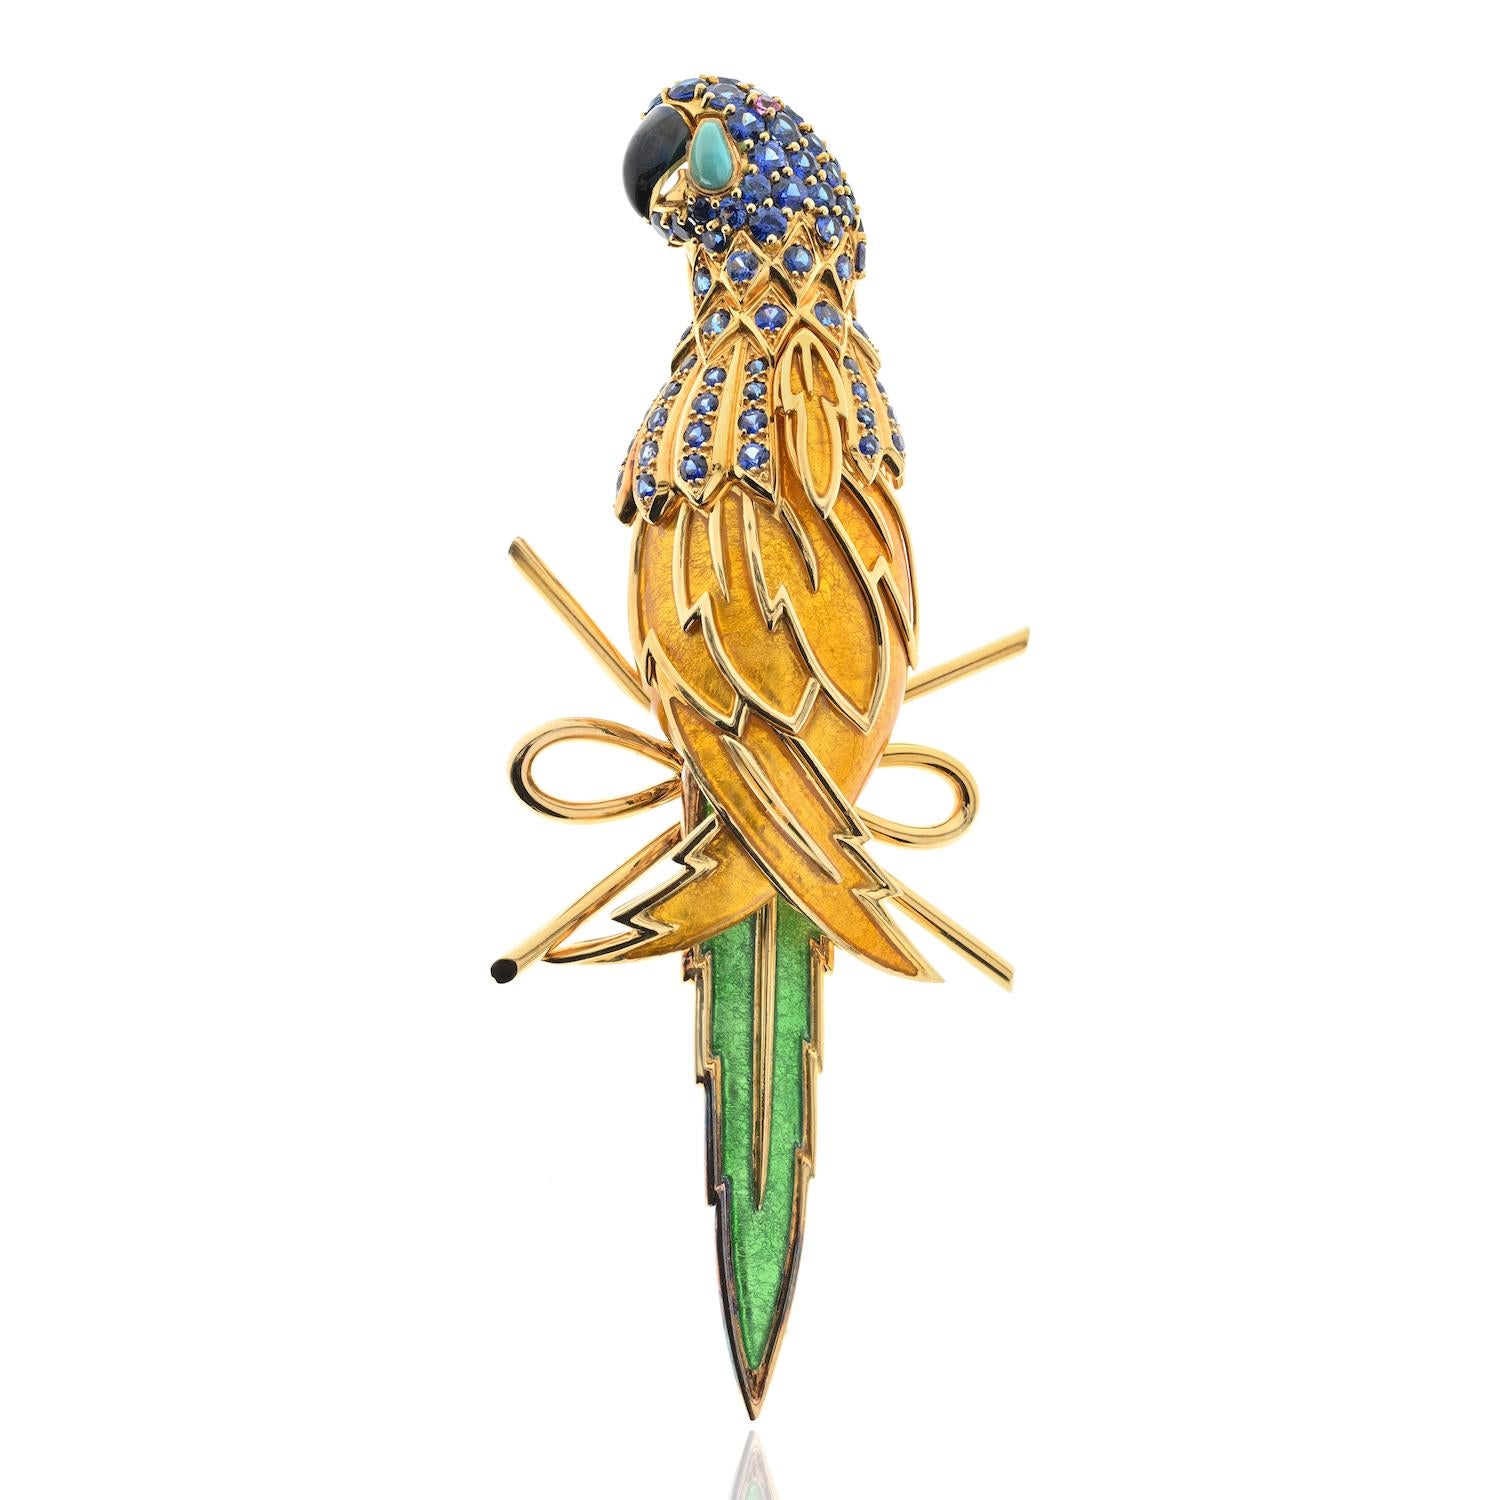 AN ENAMEL AND MULTI-GEM PARROT BROOCH, BY JEAN SCHLUMBERGER, TIFFANY & CO.

Embark on a journey of vibrant elegance with the Tiffany & Co. Jean Schlumberger Enamel and Multi-Gem Parrot Brooch, a true masterpiece of wearable art. Crafted with